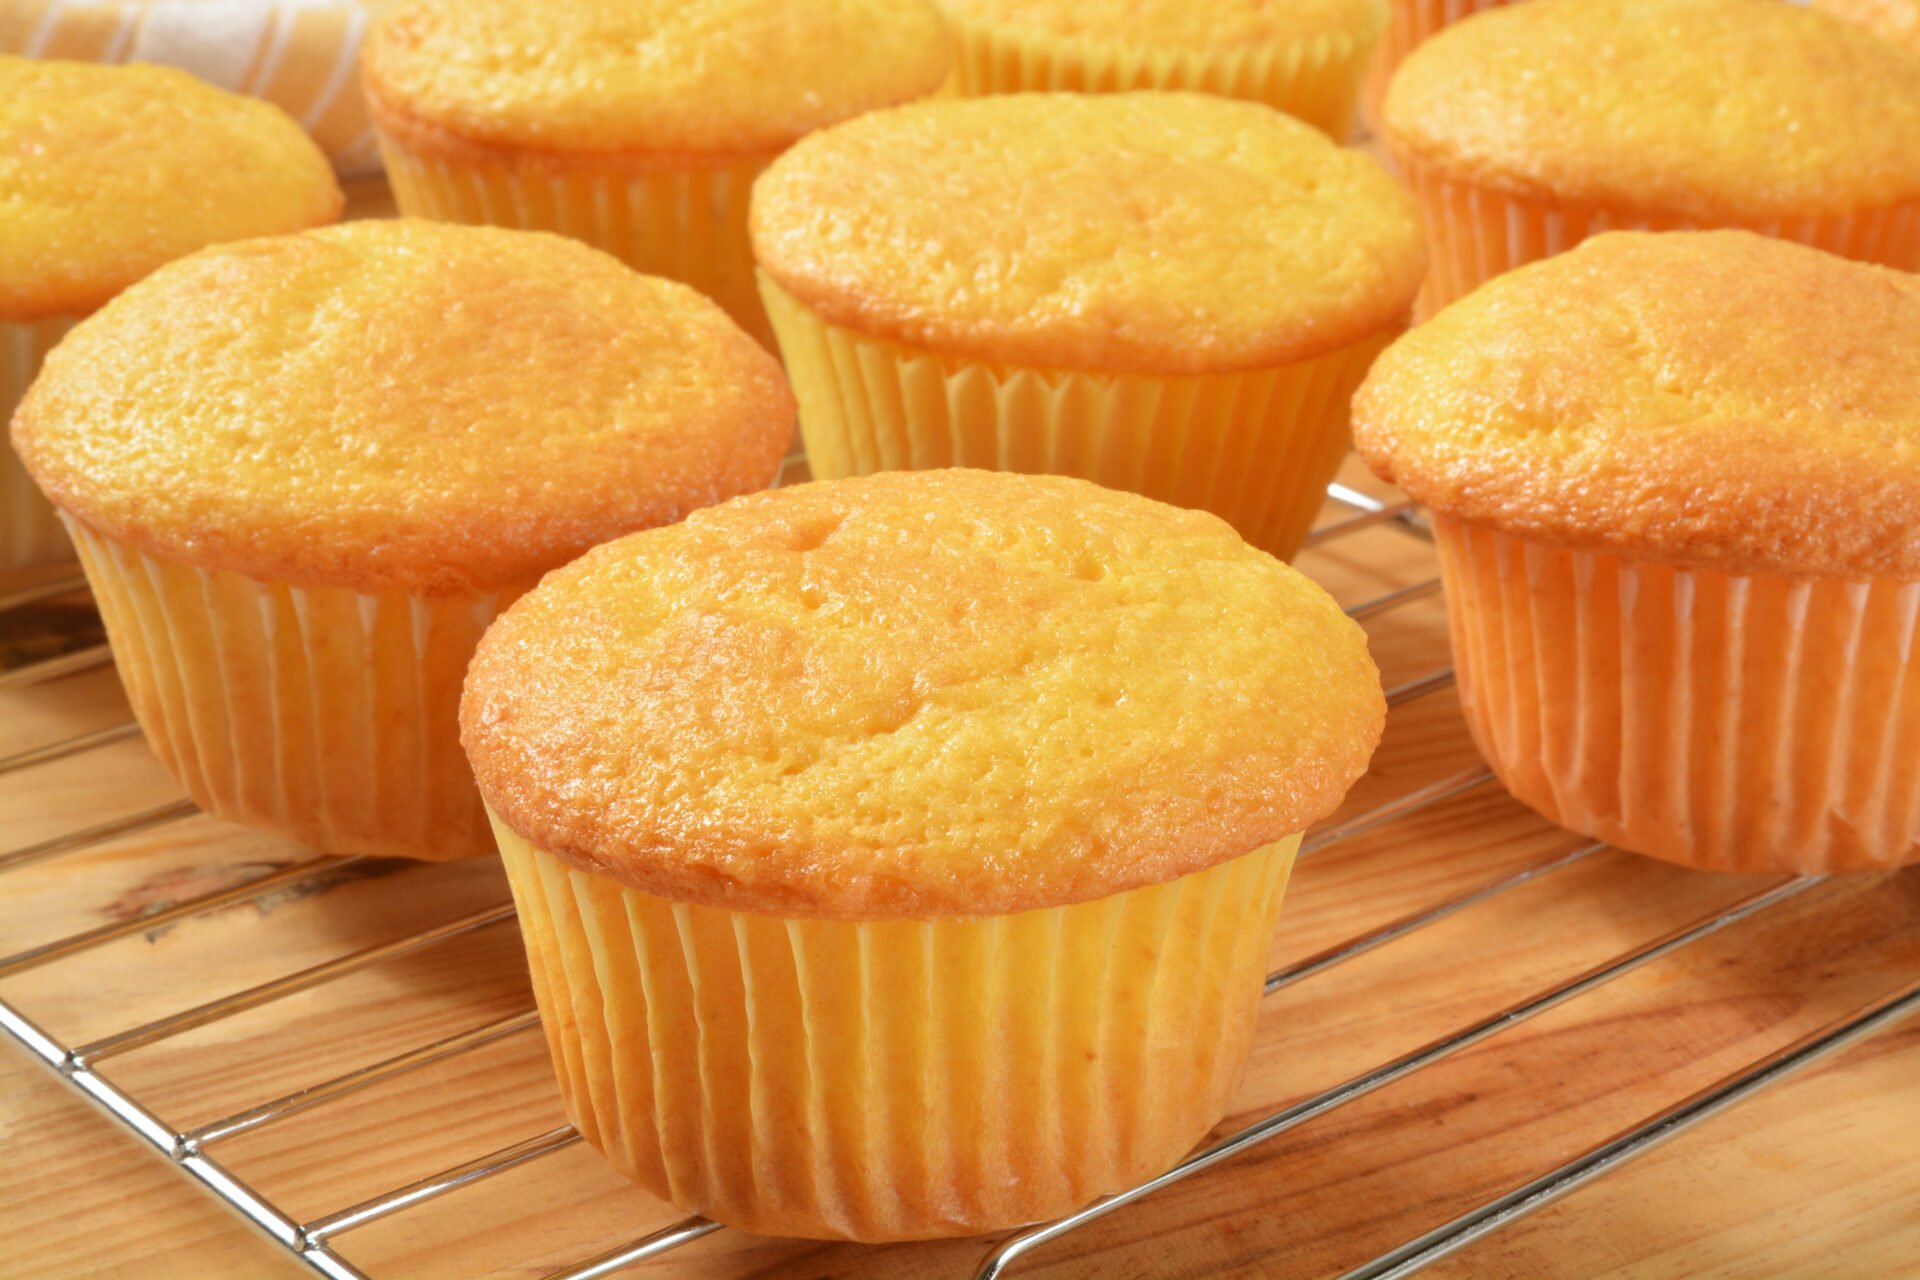 Fresh baked yellow cupcakes on a cooling rack